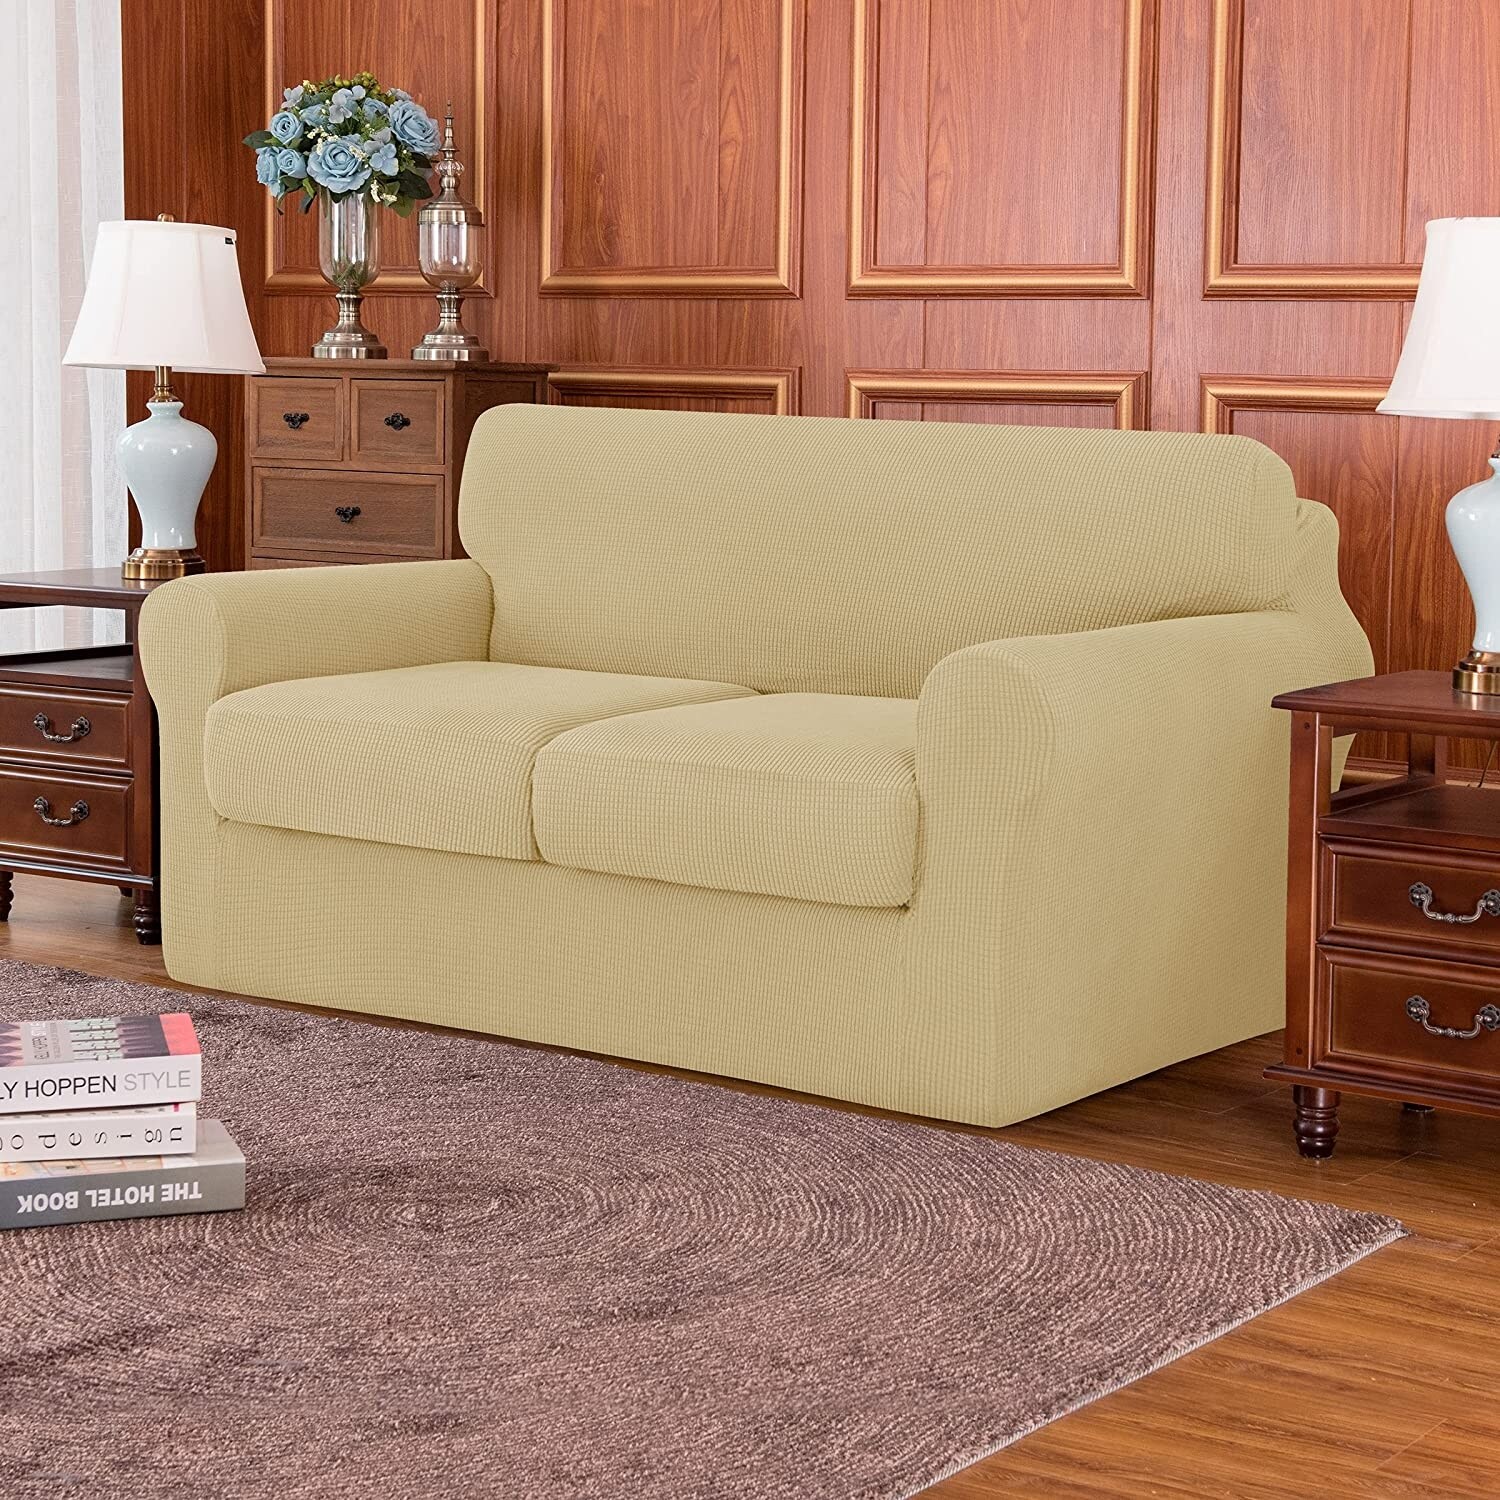 https://ak1.ostkcdn.com/images/products/is/images/direct/62da75e70941edae4da5eee84dbe72a720c5f552/Subrtex-Slipcover-Stretch-Loveseat-Cover-with-Separate-Cushion-Cover.jpg